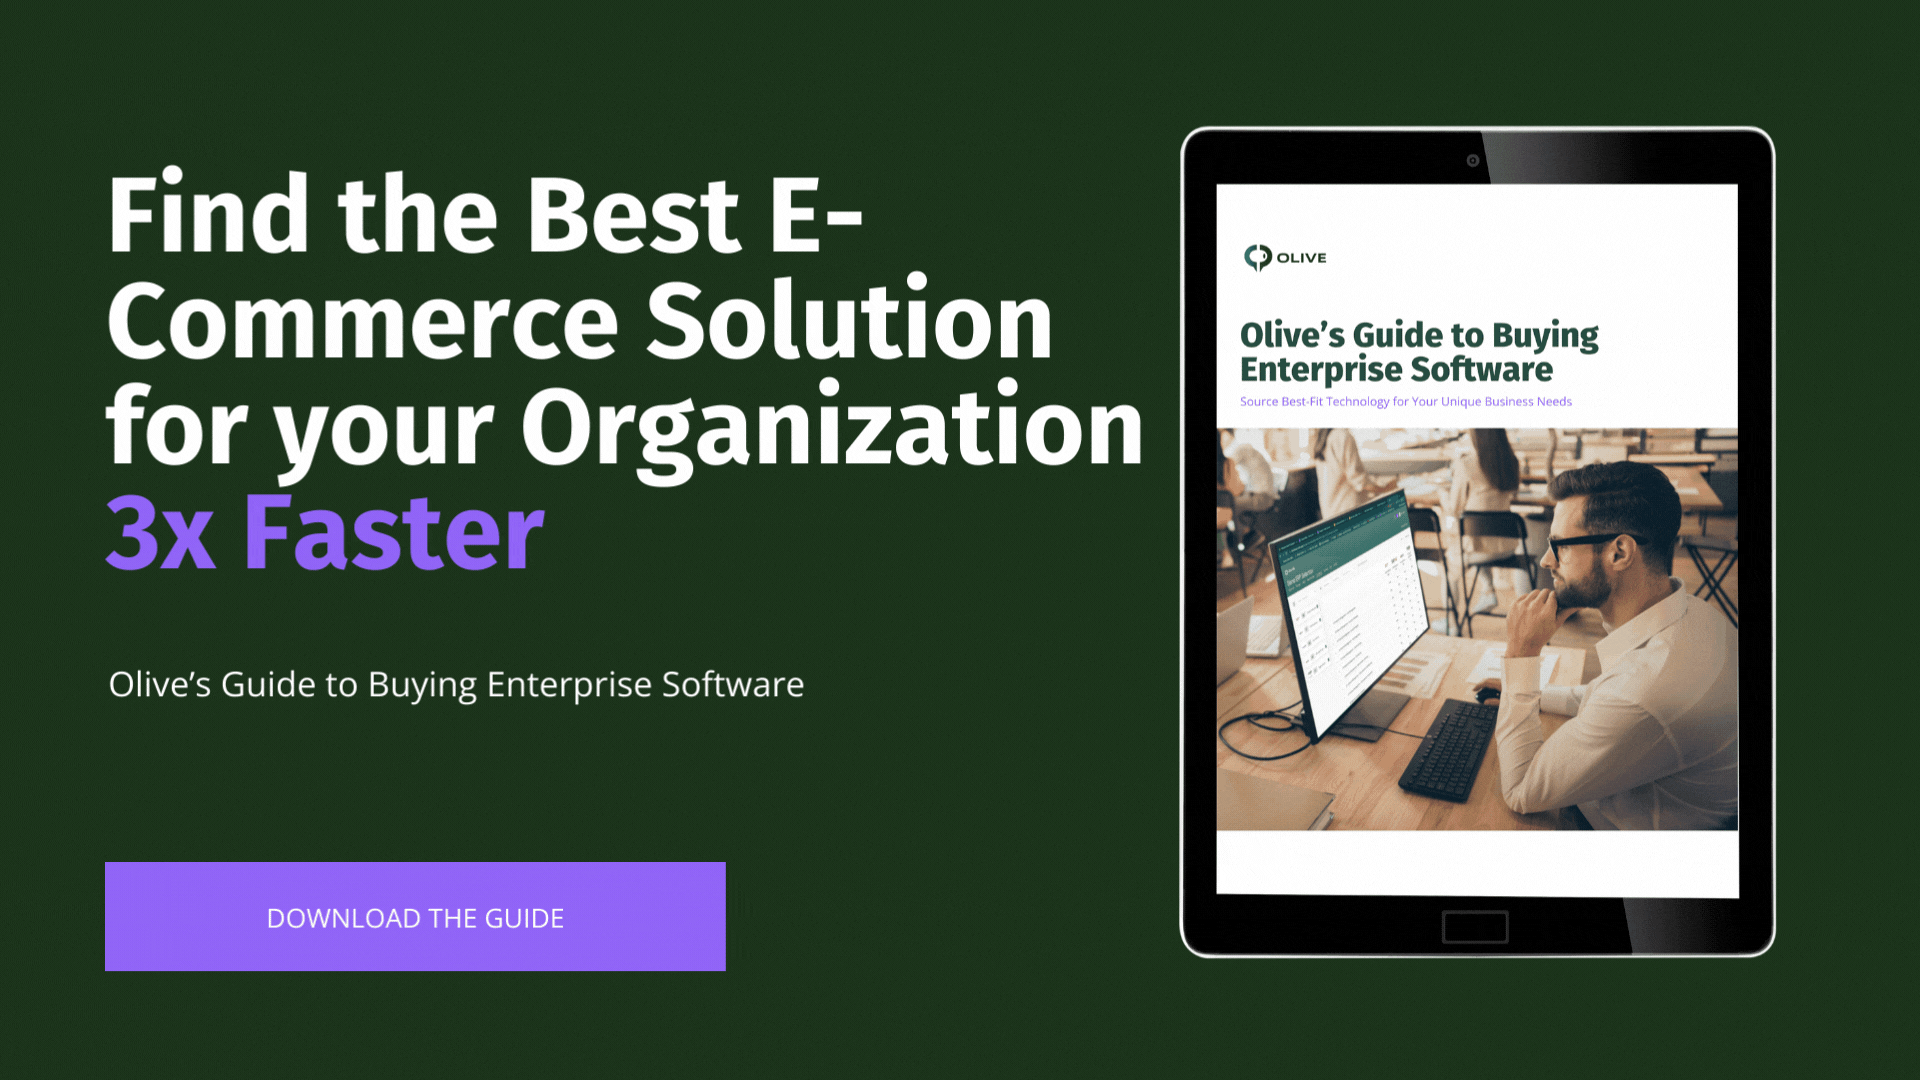 Source the best E Commerce Solutions with Olives guide to buying enterprise software. link to download whitepaper